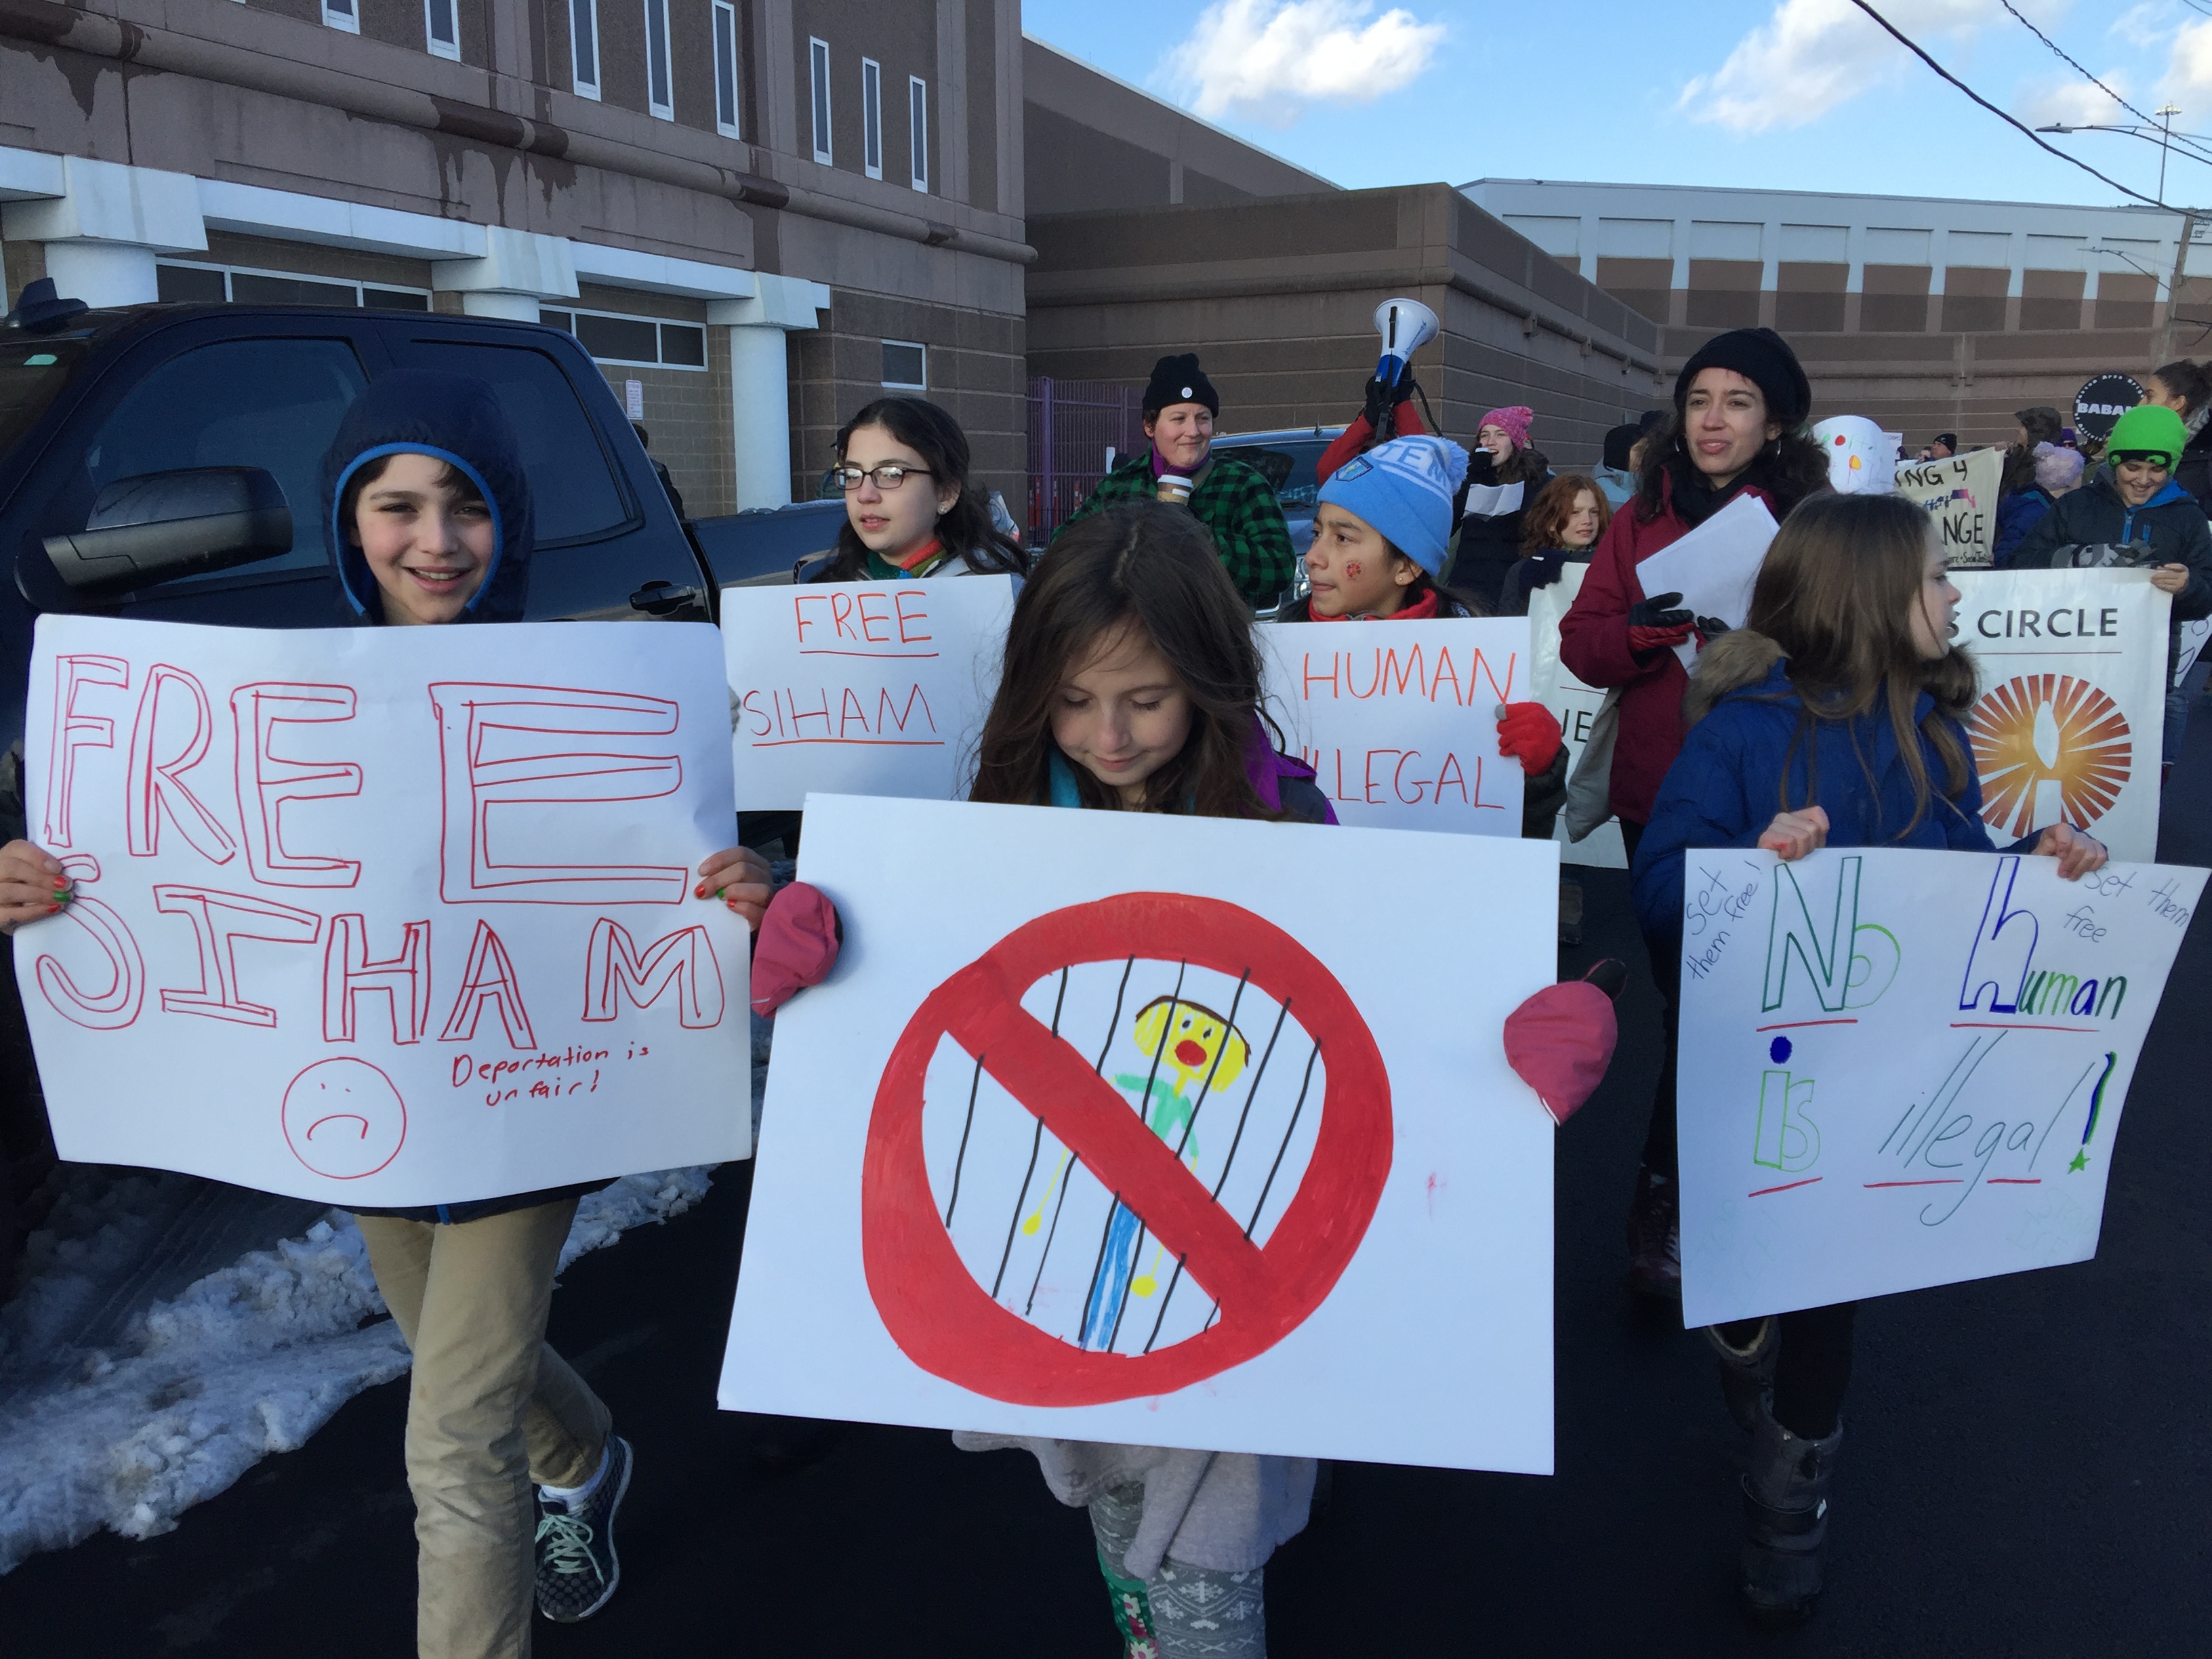 Freedom for Francisco and Siham: Kids Protest Against ICE Arrests